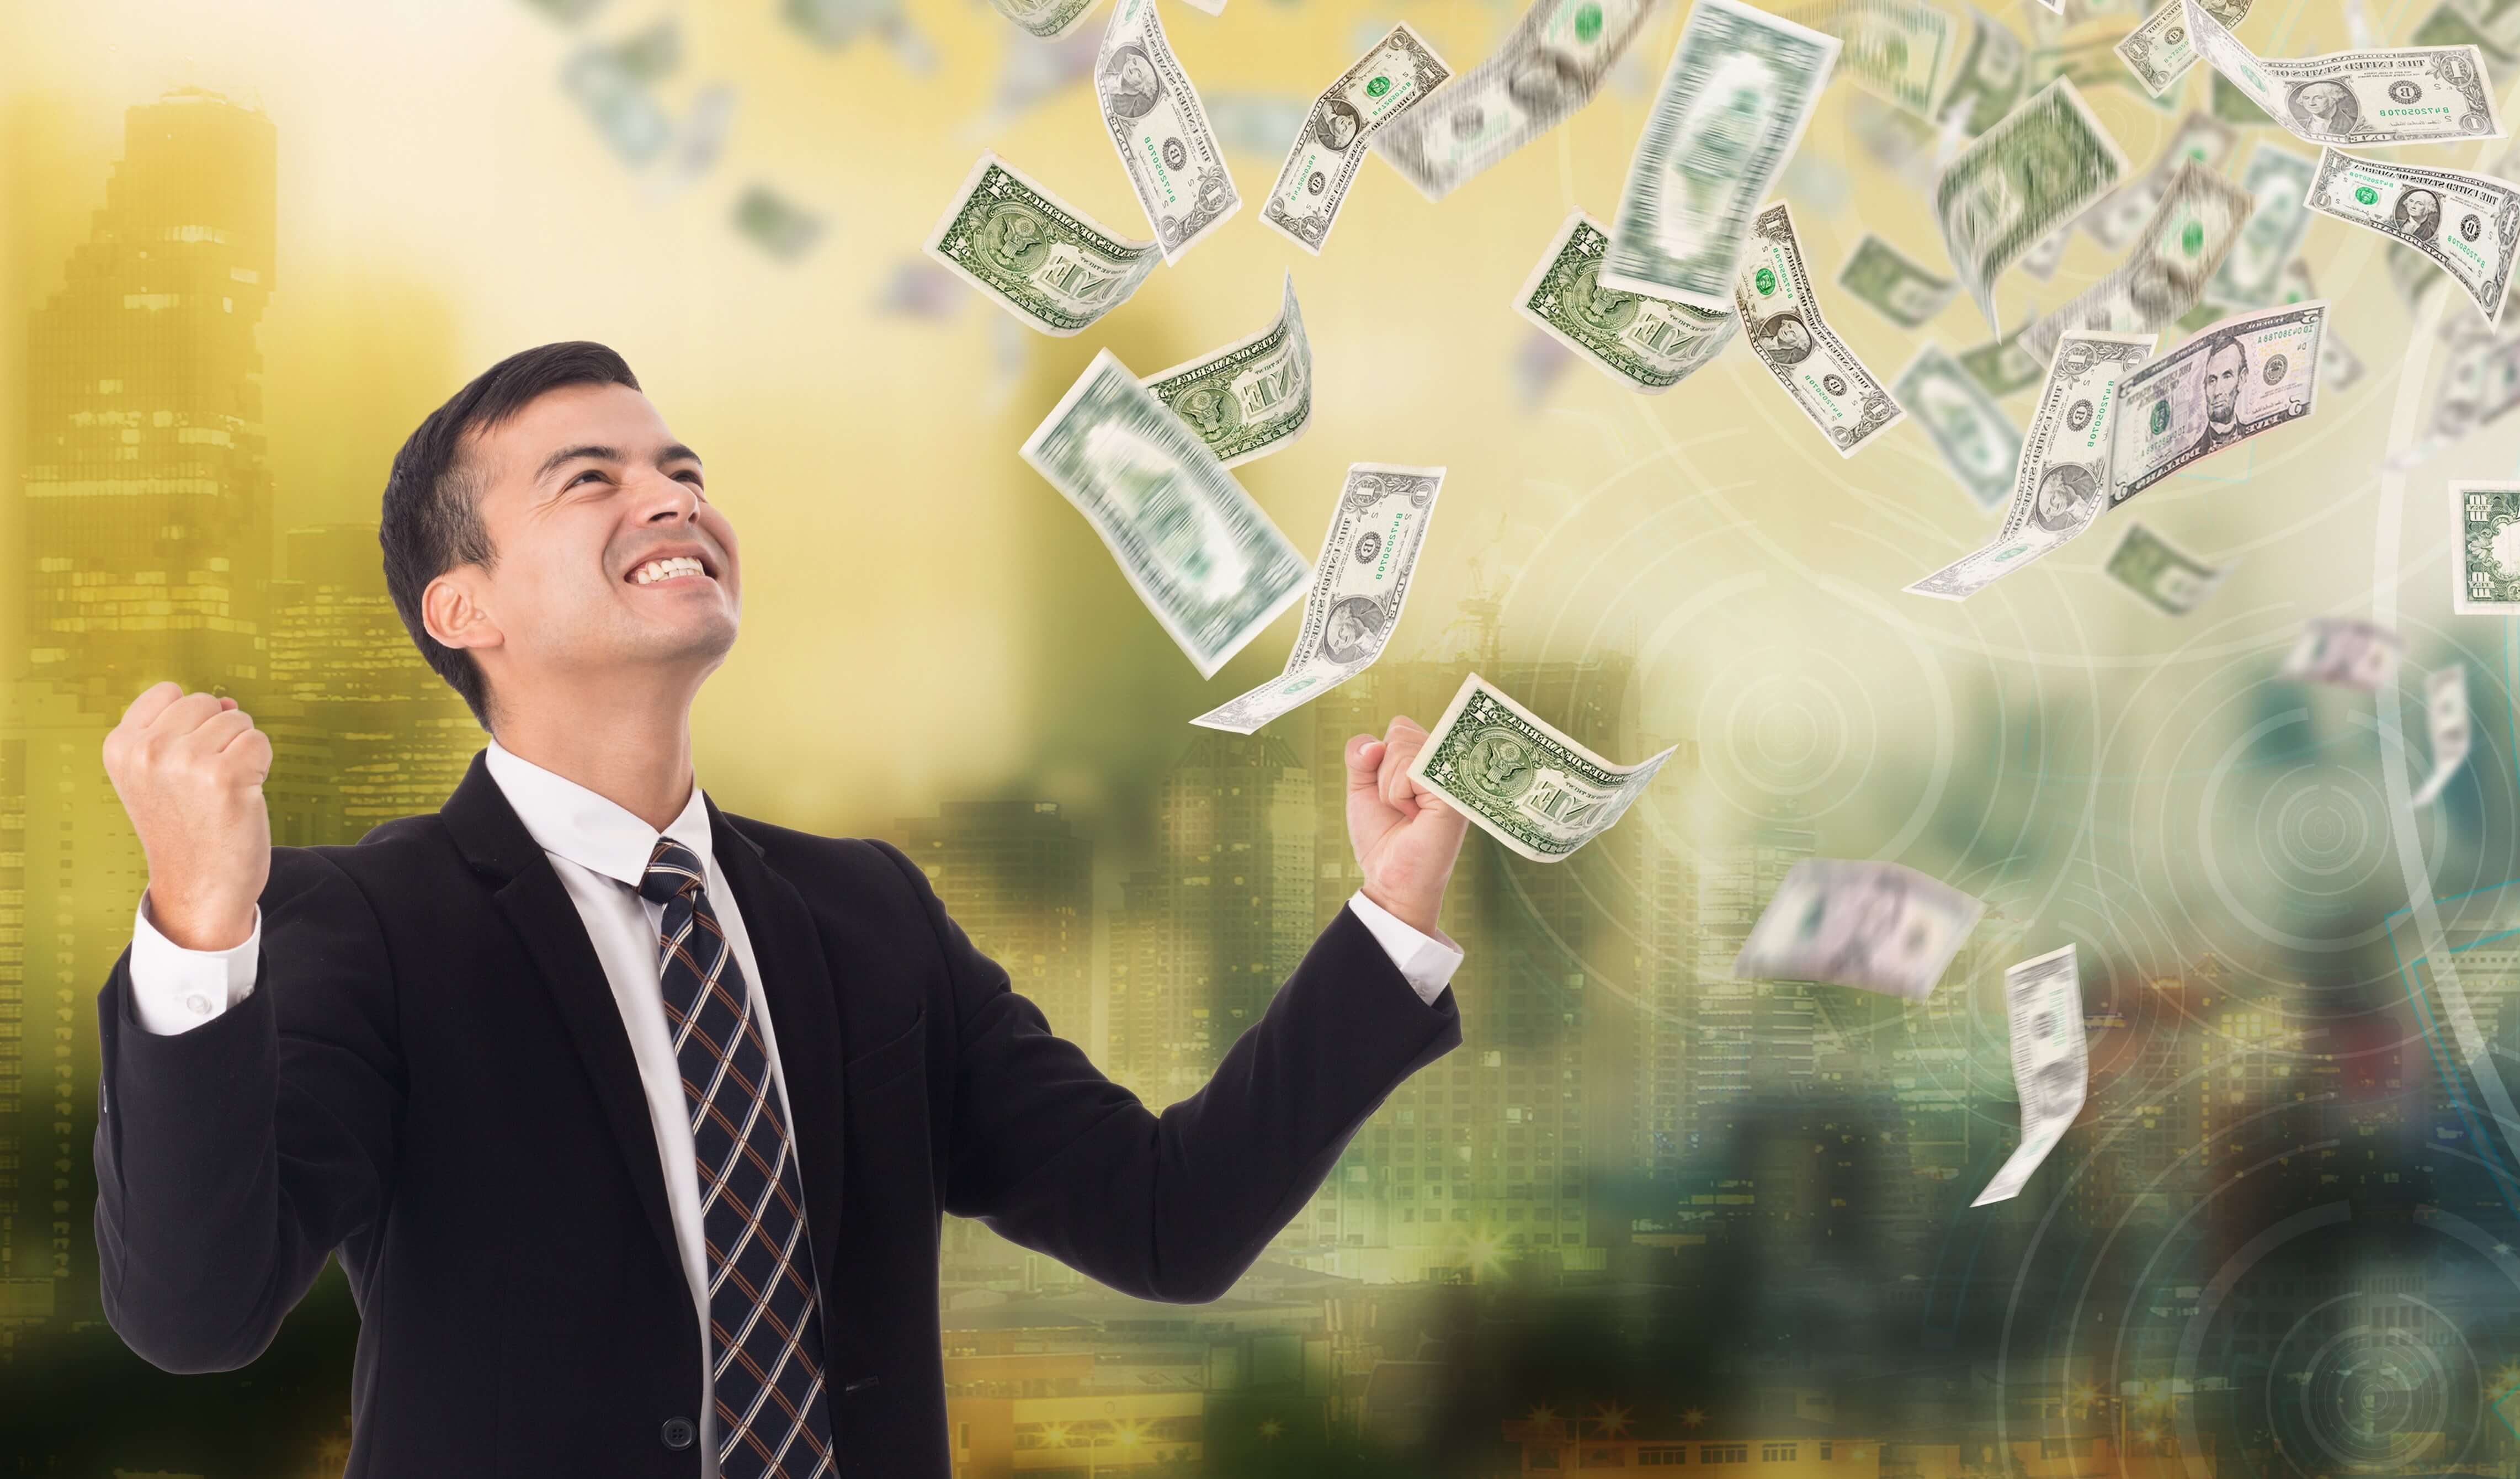 Save money on energy bills | business man happy about dollar bills swirling in the air